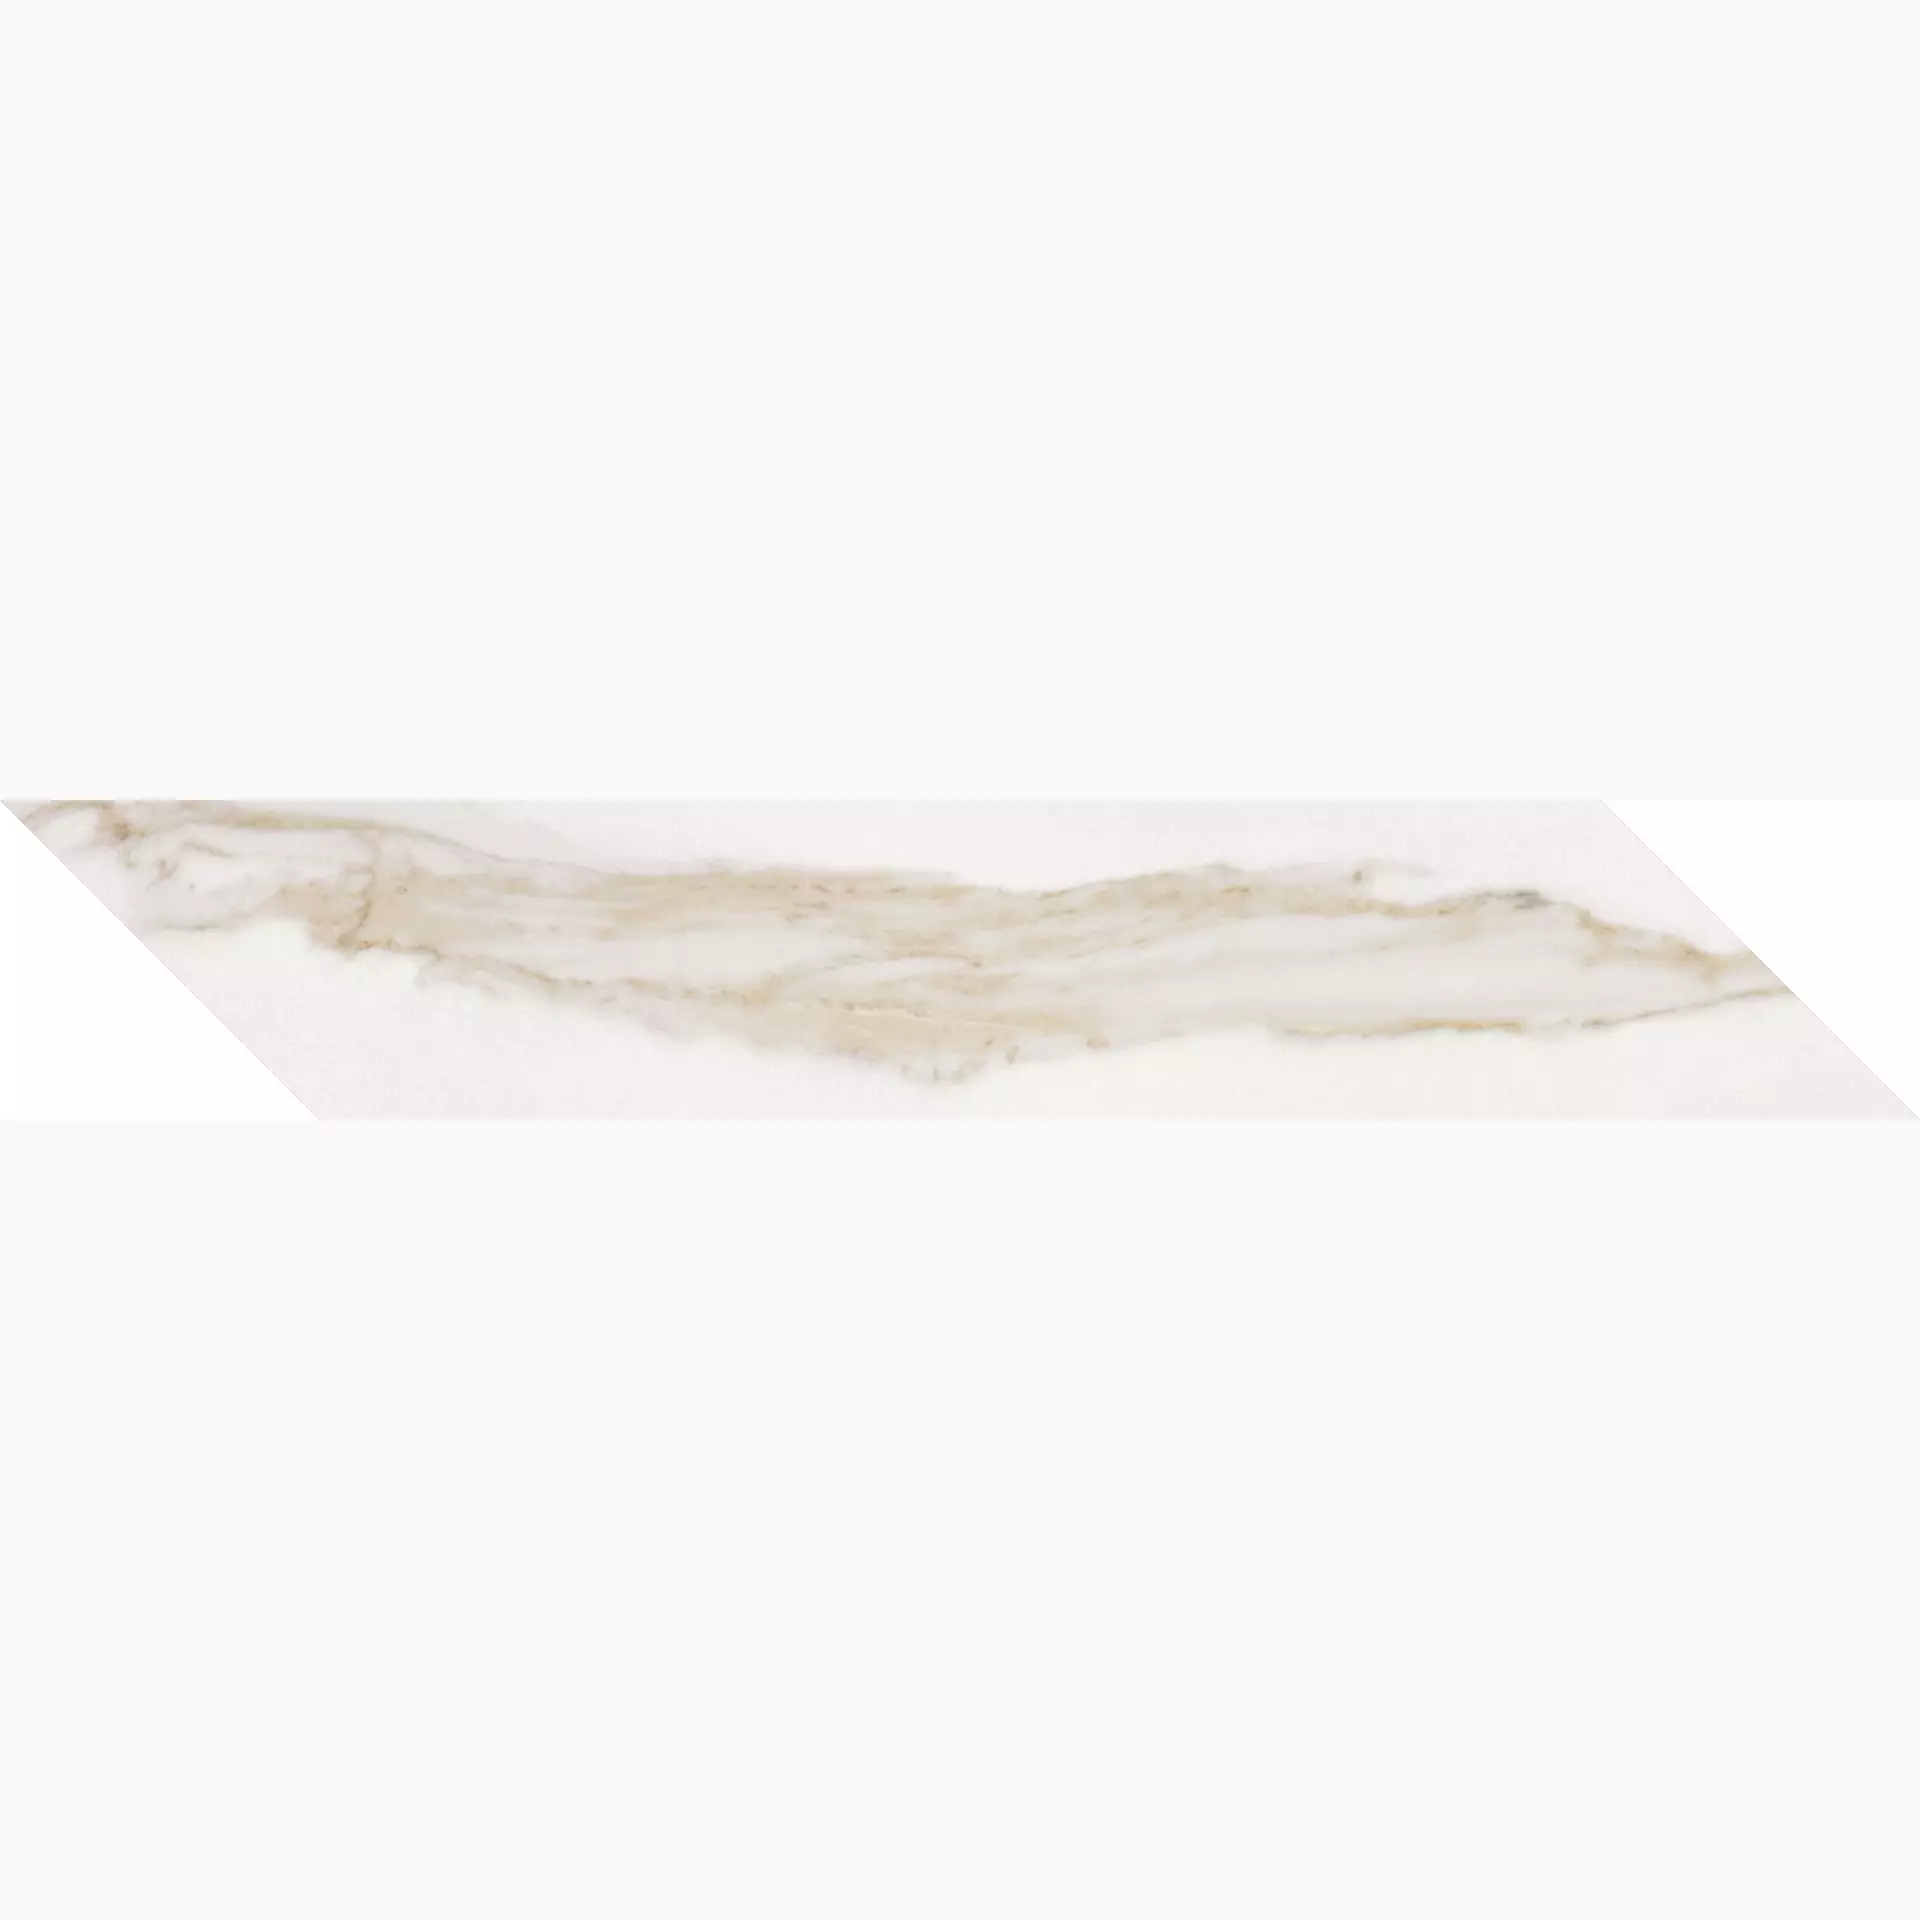 Keope Elements Lux Calacatta Gold Lappato Chevron Left 54384132 10x60cm rectified 9mm